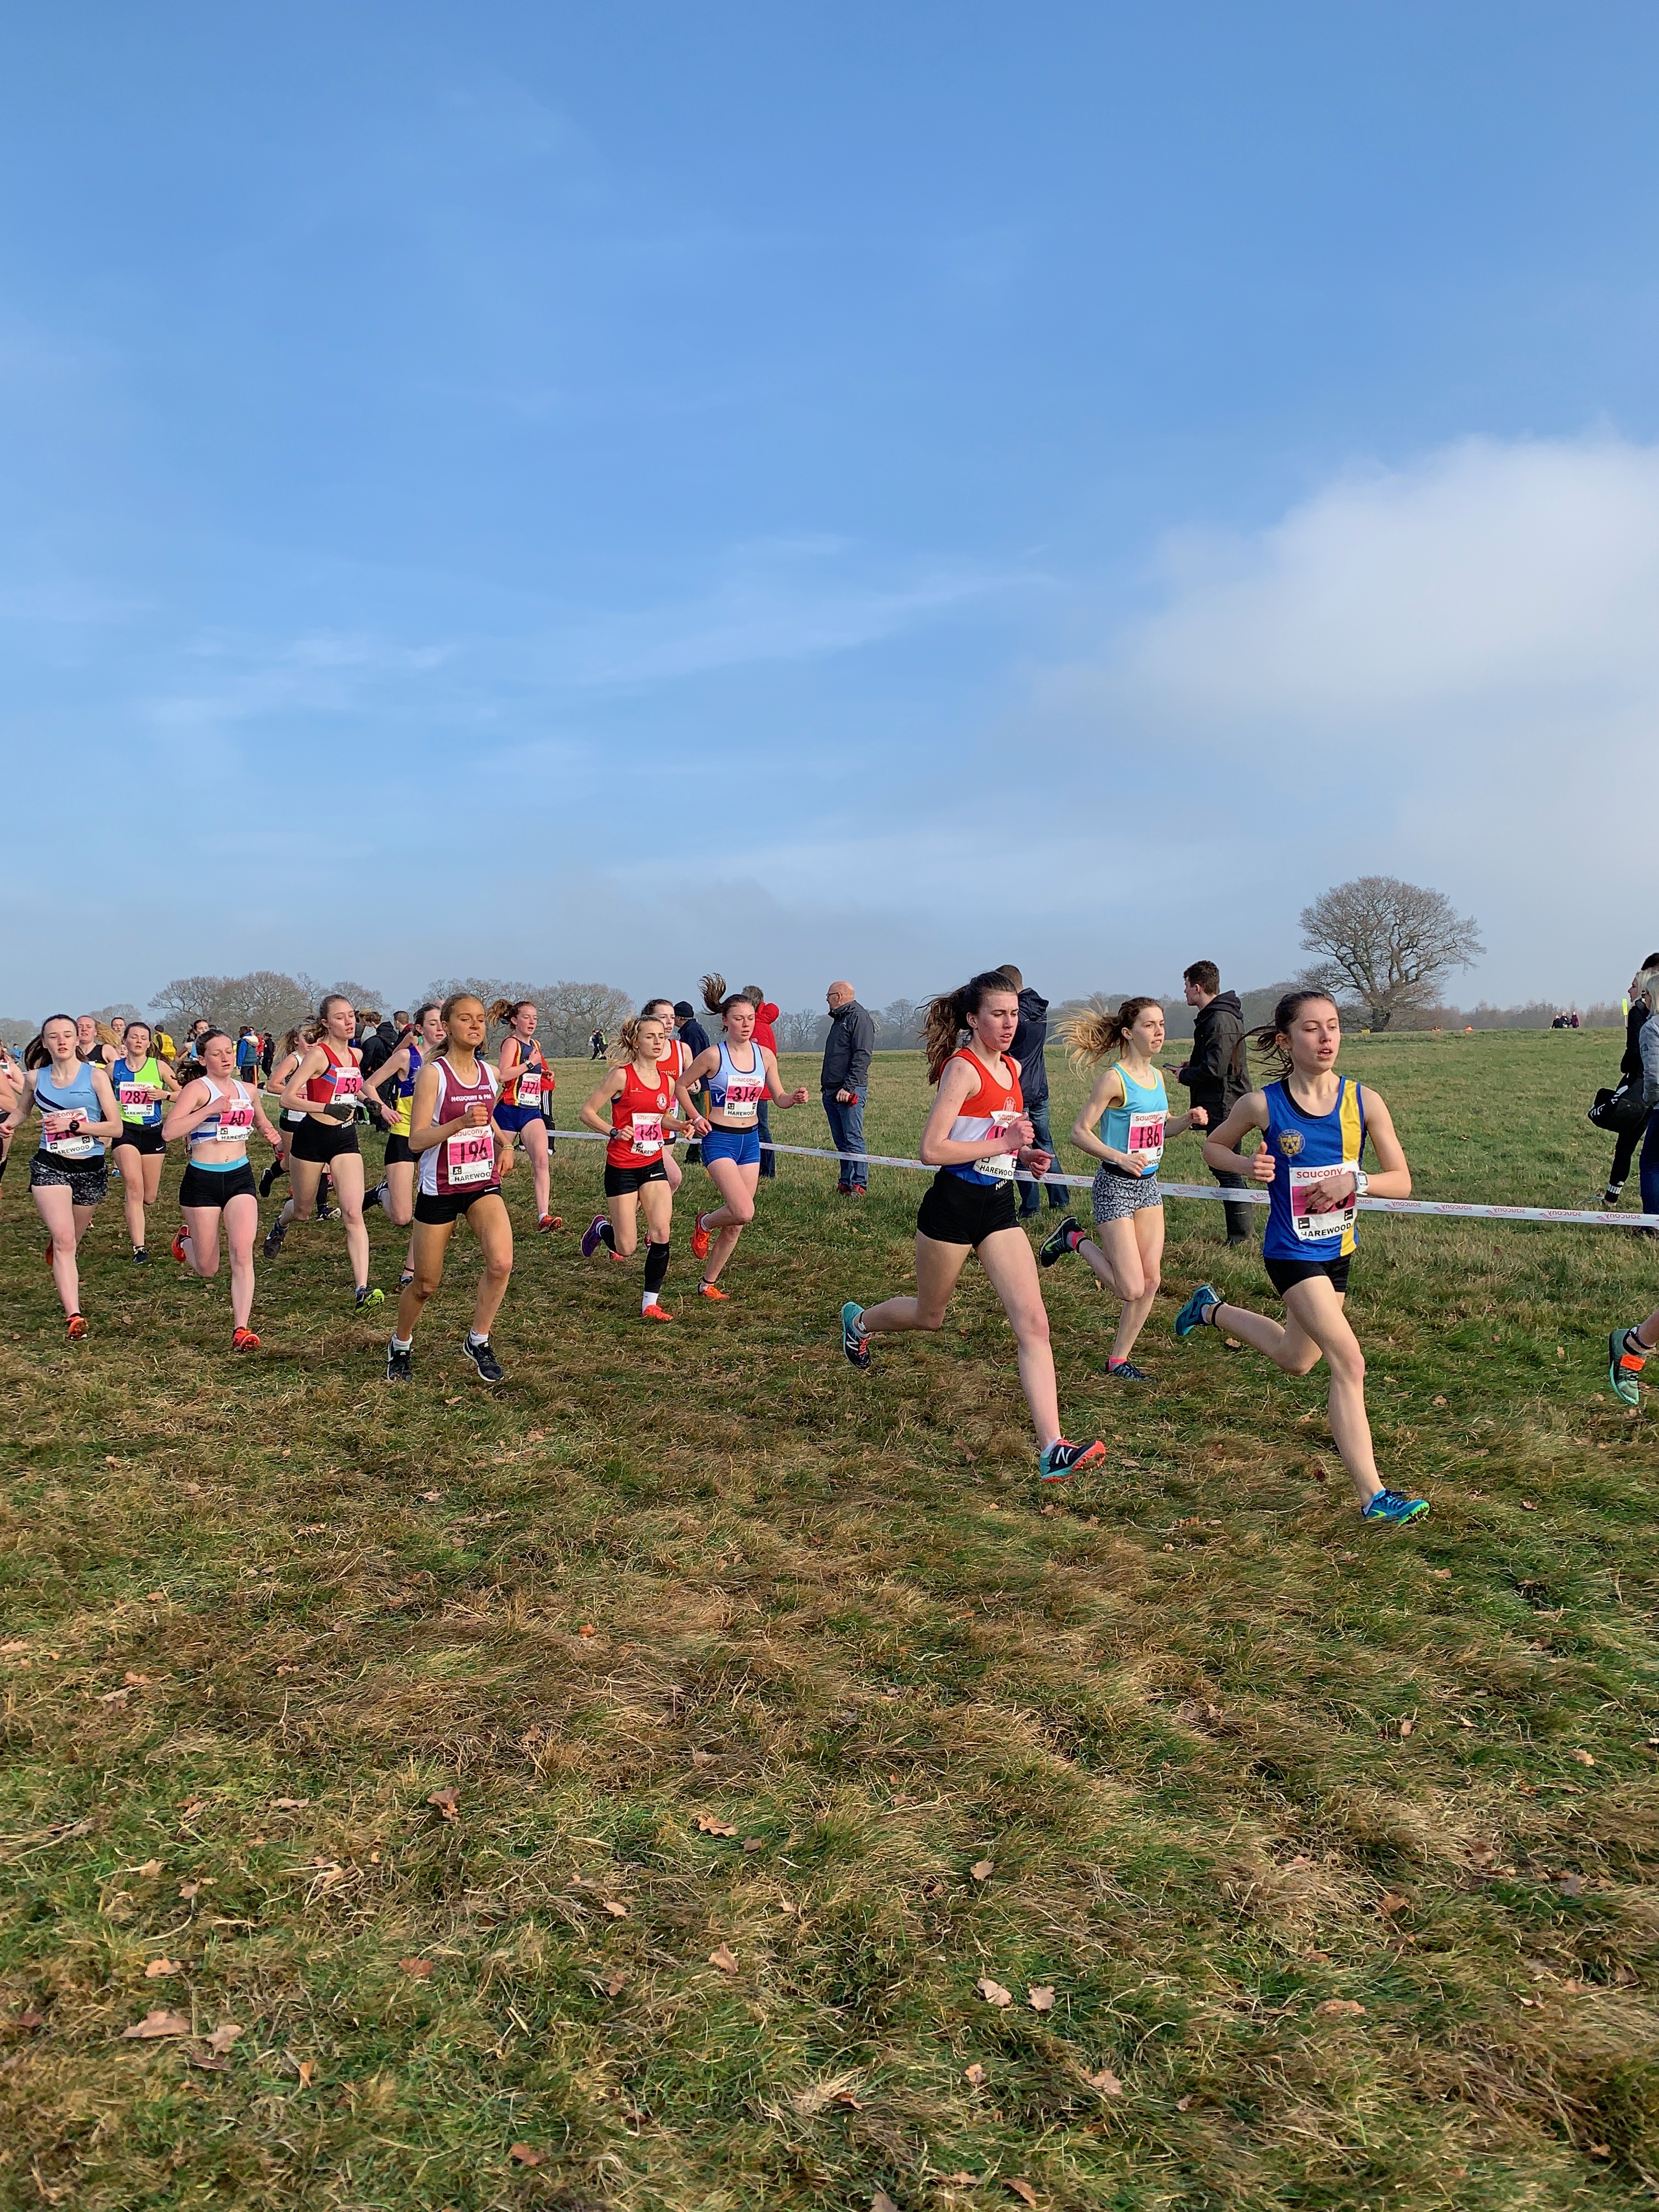 English National Cross Country Championships at Leeds – 23/2/2019